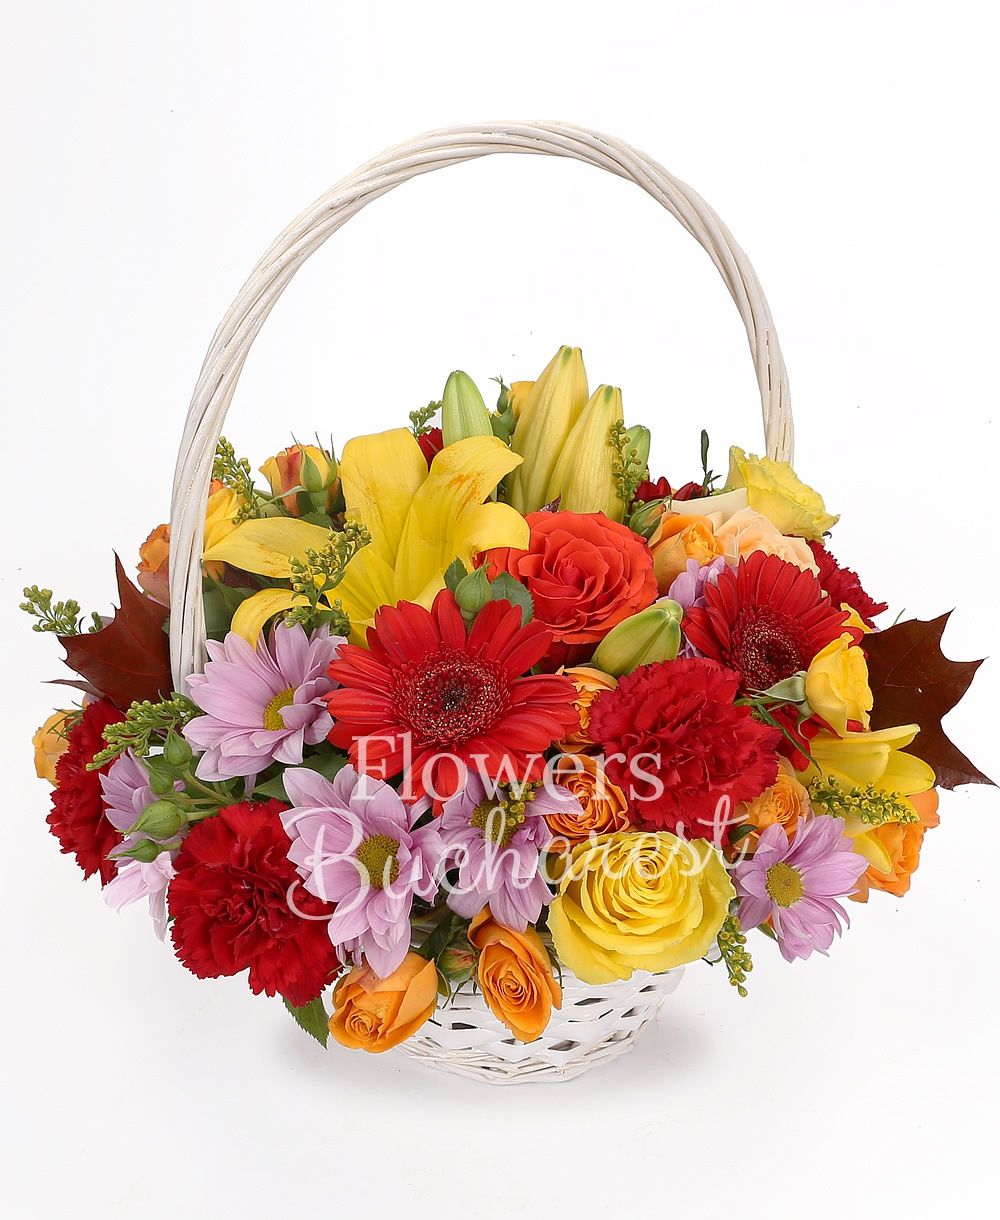 2 yellow lilies, 3 red roses, 5 red gerberas, 5 yellow roses, 2 cream roses, 3 yellow miniroses, 4 orange miniroses, 3 pink chrysanthemums, 7 red carnations, solidago, greenery